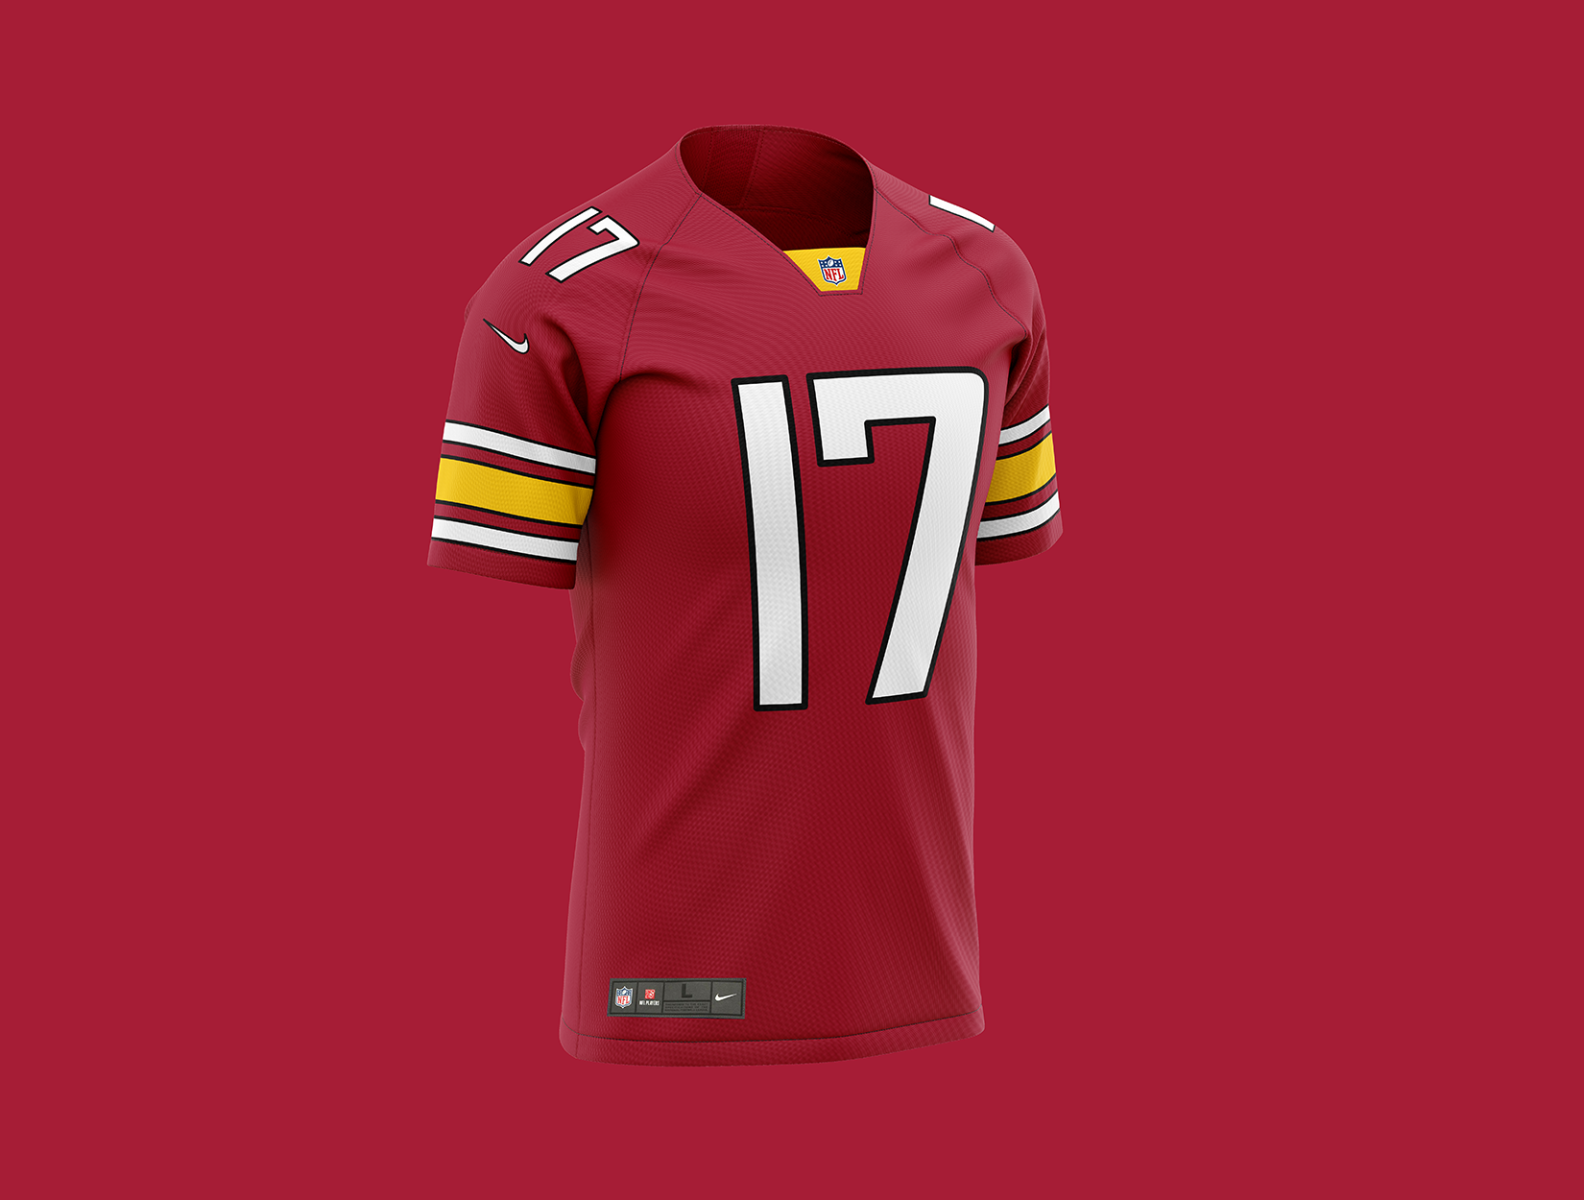 Washington Red Hawks (Redskins Rebrand) Team Concept Jersey 2020 by Luc